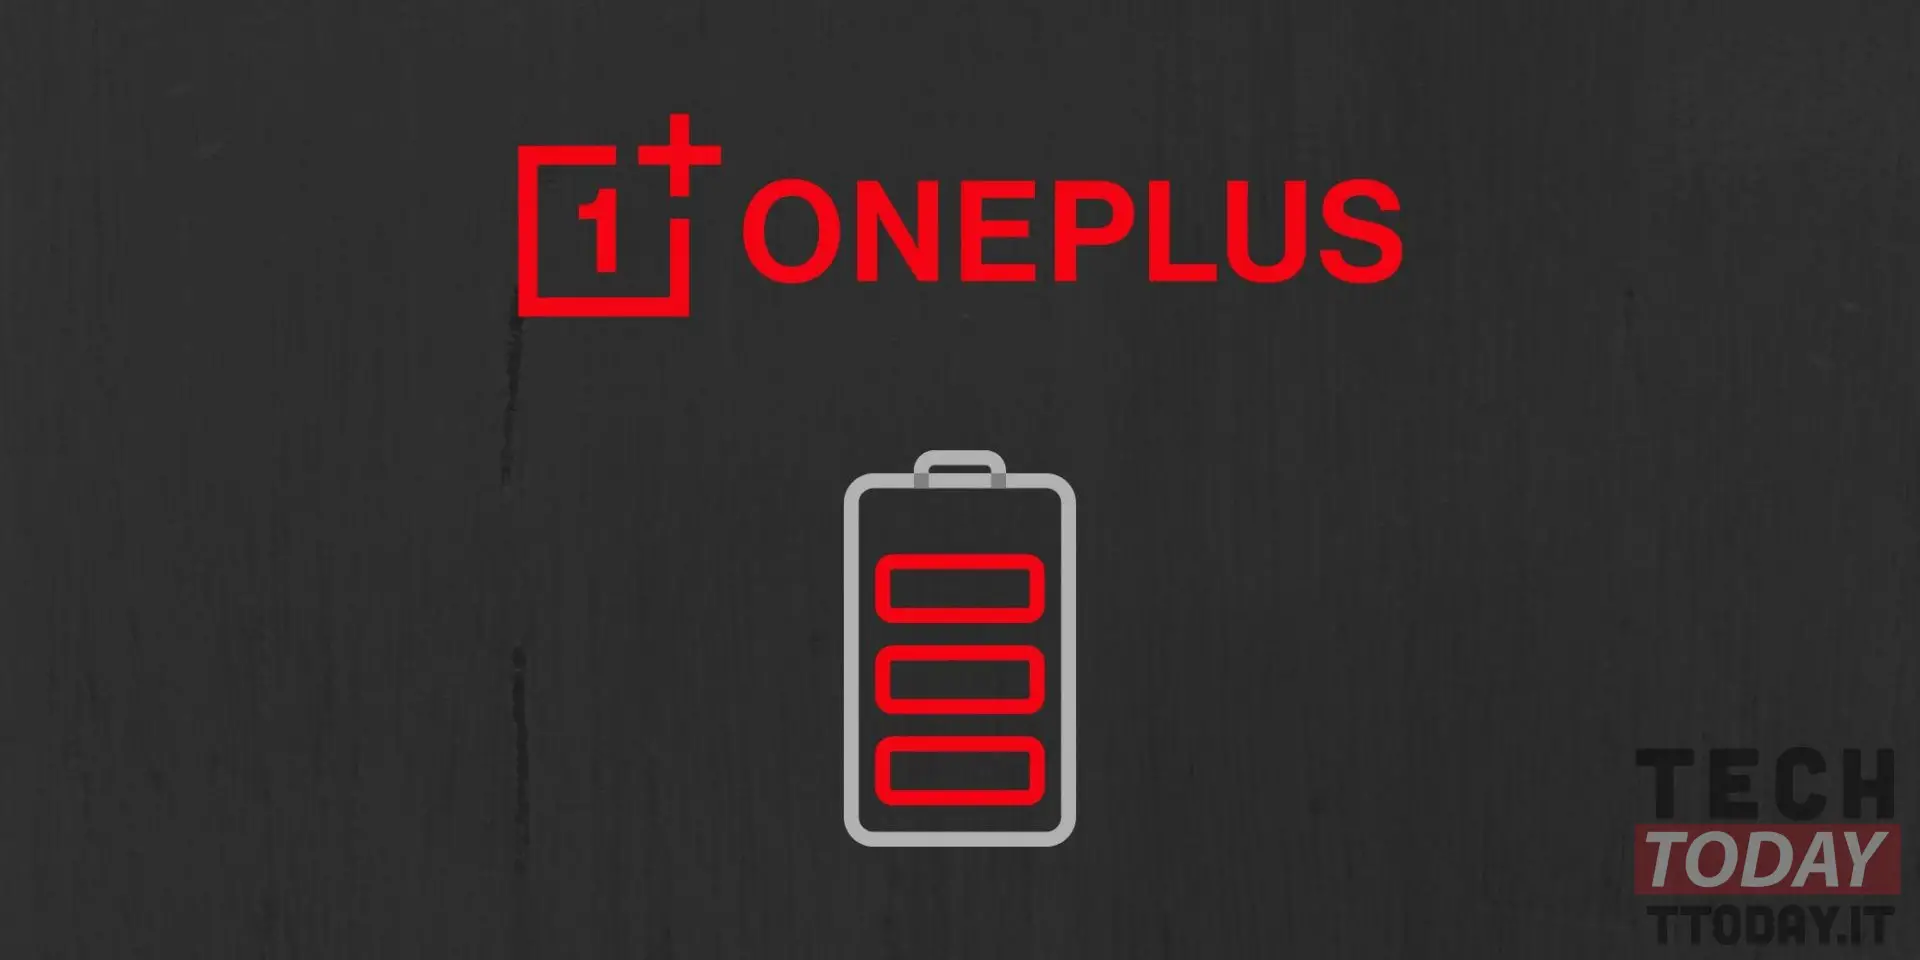 How to maximize the battery of OnePlus smartphones